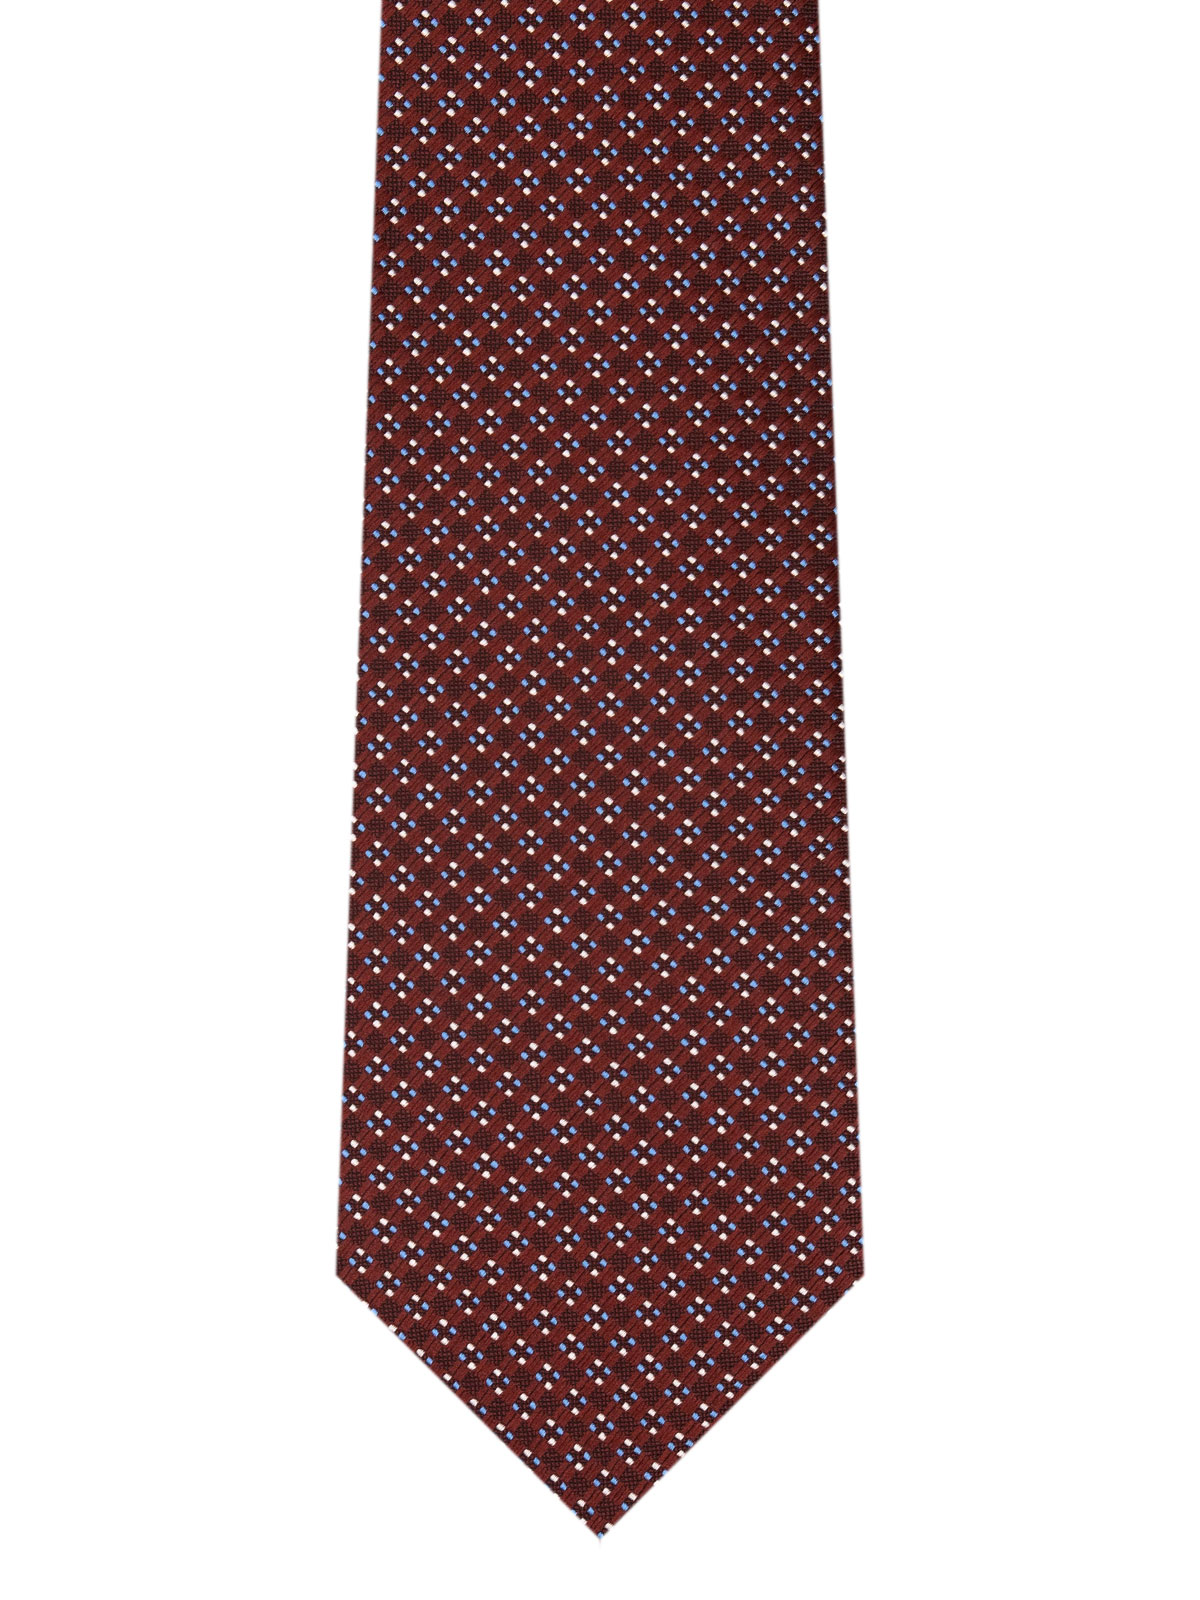 Tie in brown with small figures - 10184 - € 14.06 img2